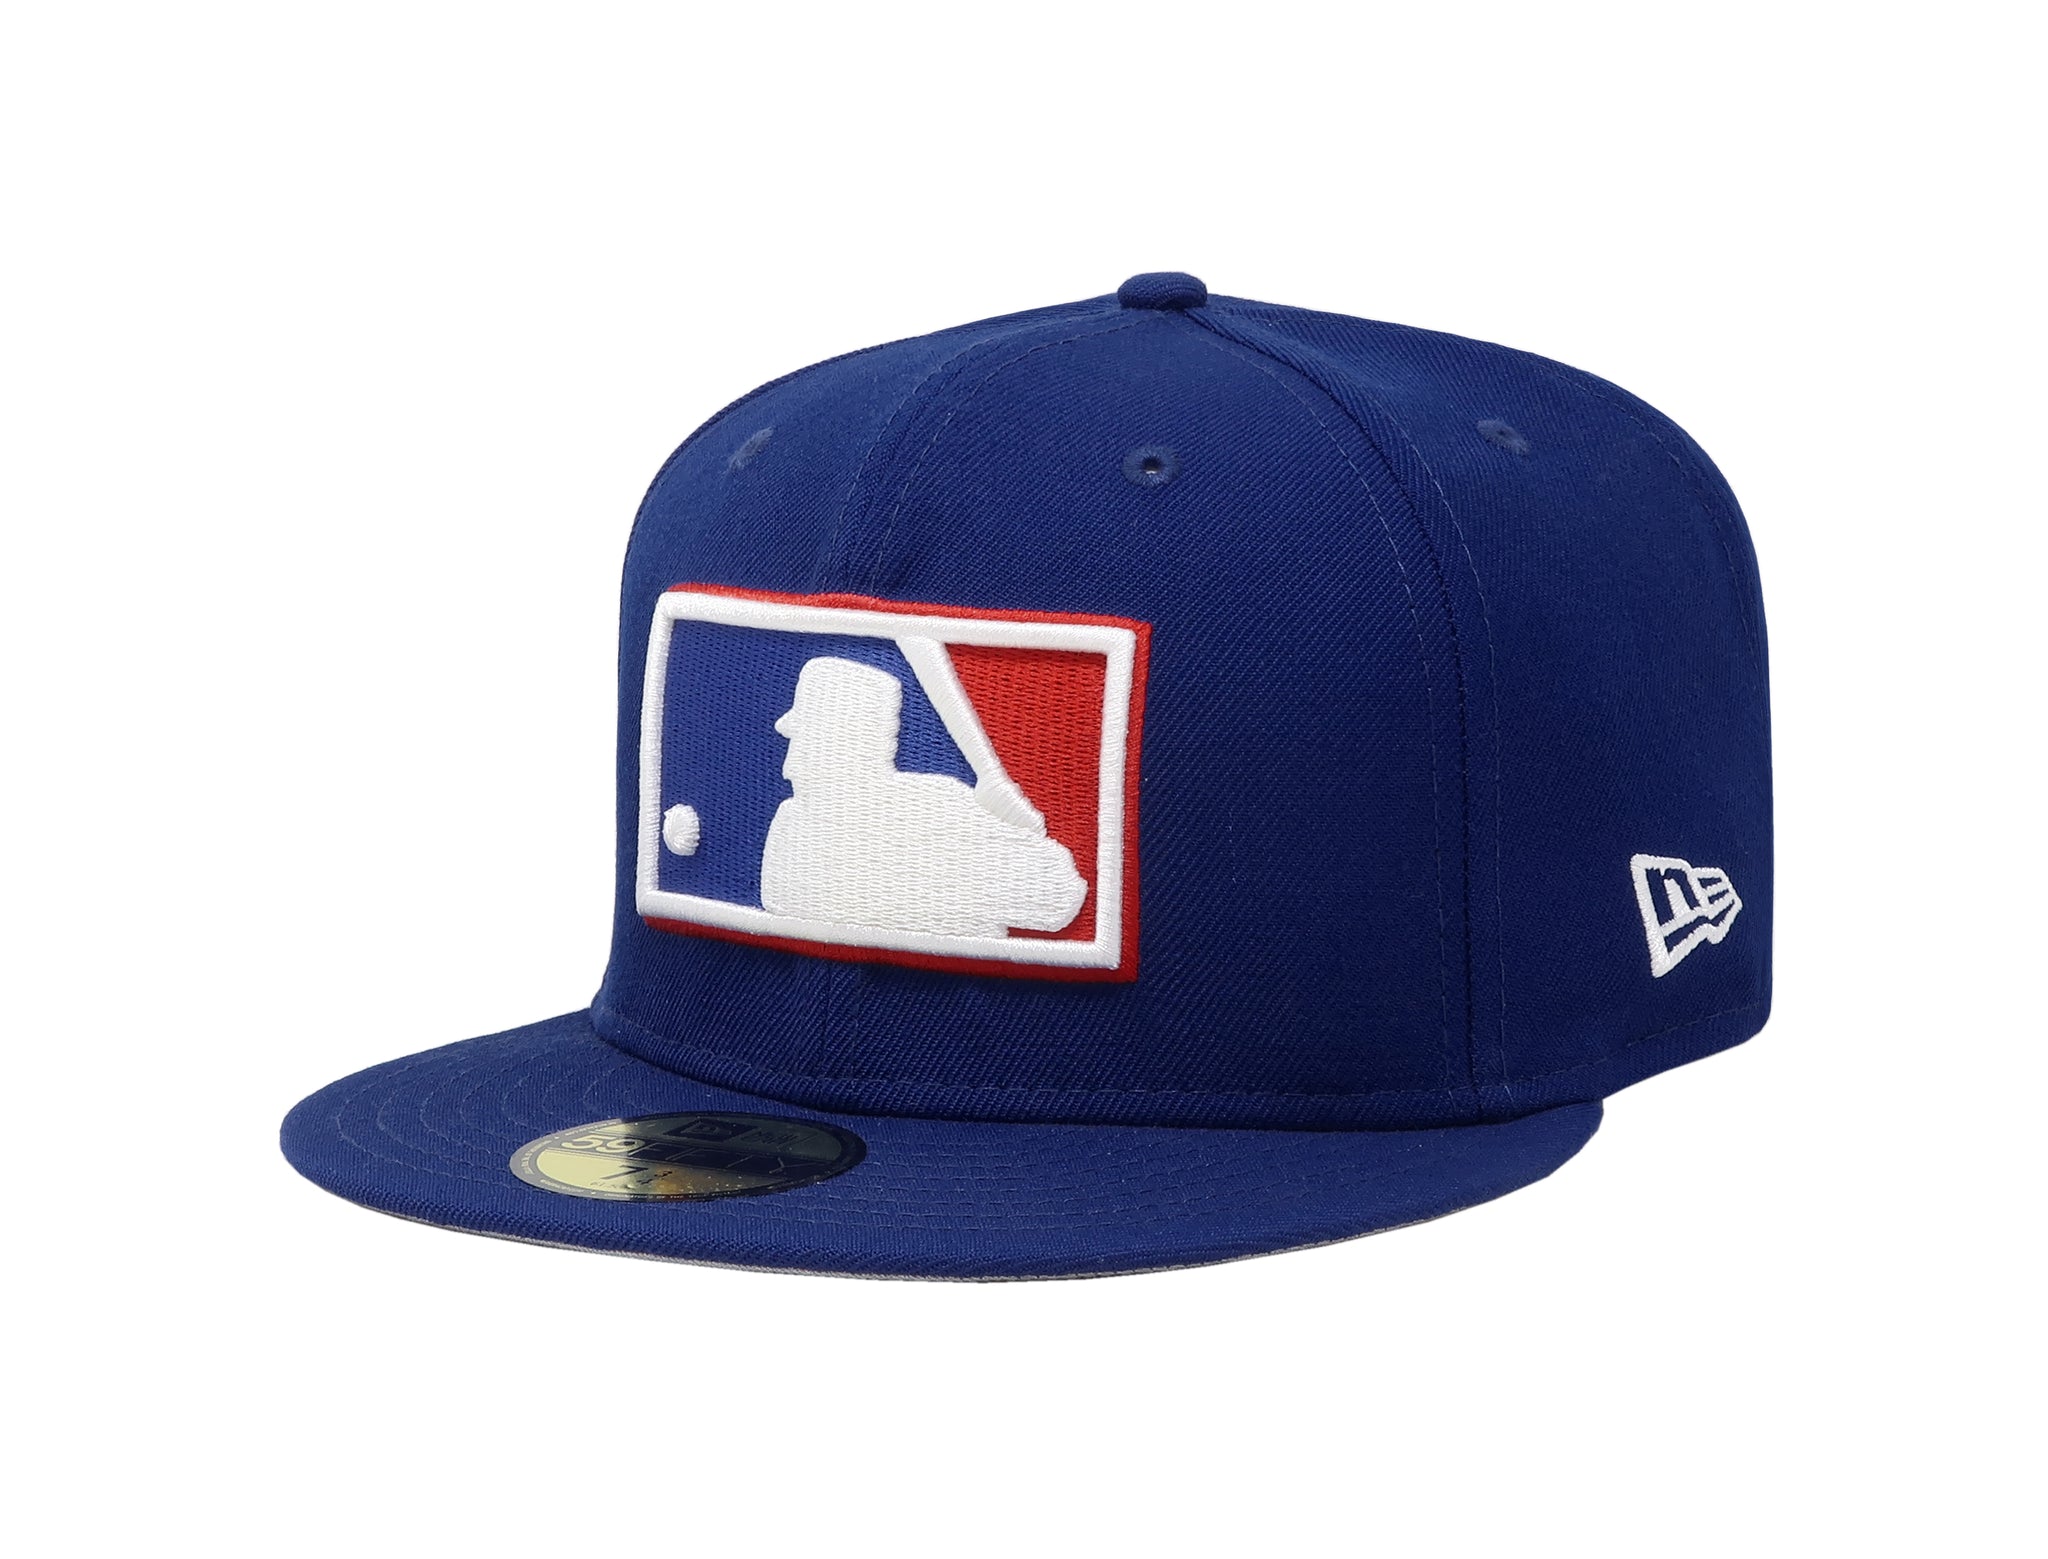 New Era 59Fifty Fitted MLB Cooperstown Men's Hat Cap